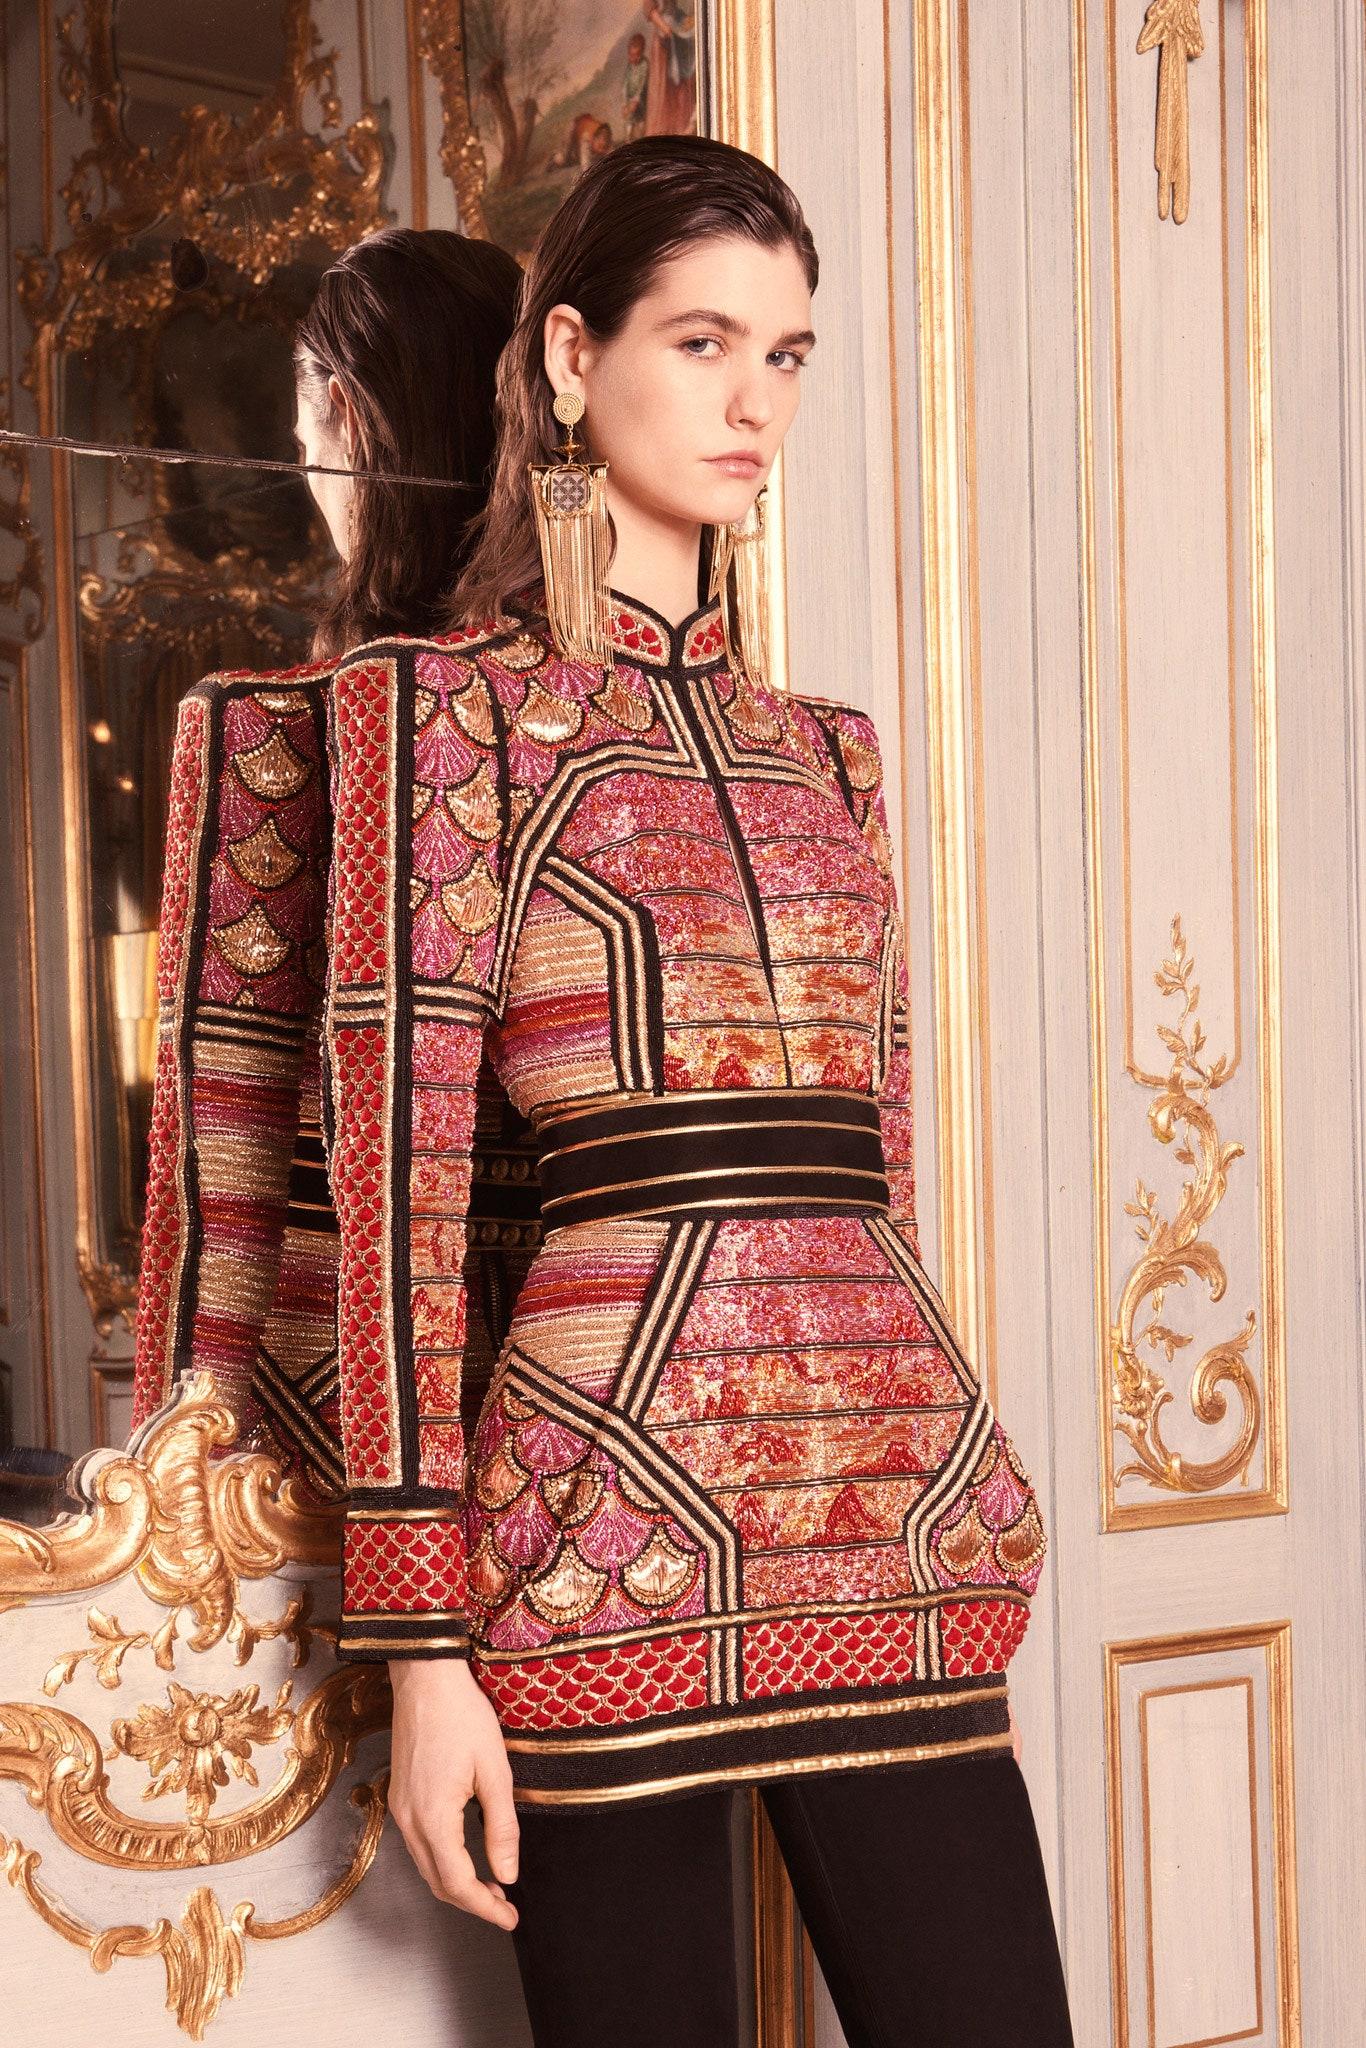 Balmain Pre-Fall 2013 Evening mini dress with gold patent leather 1